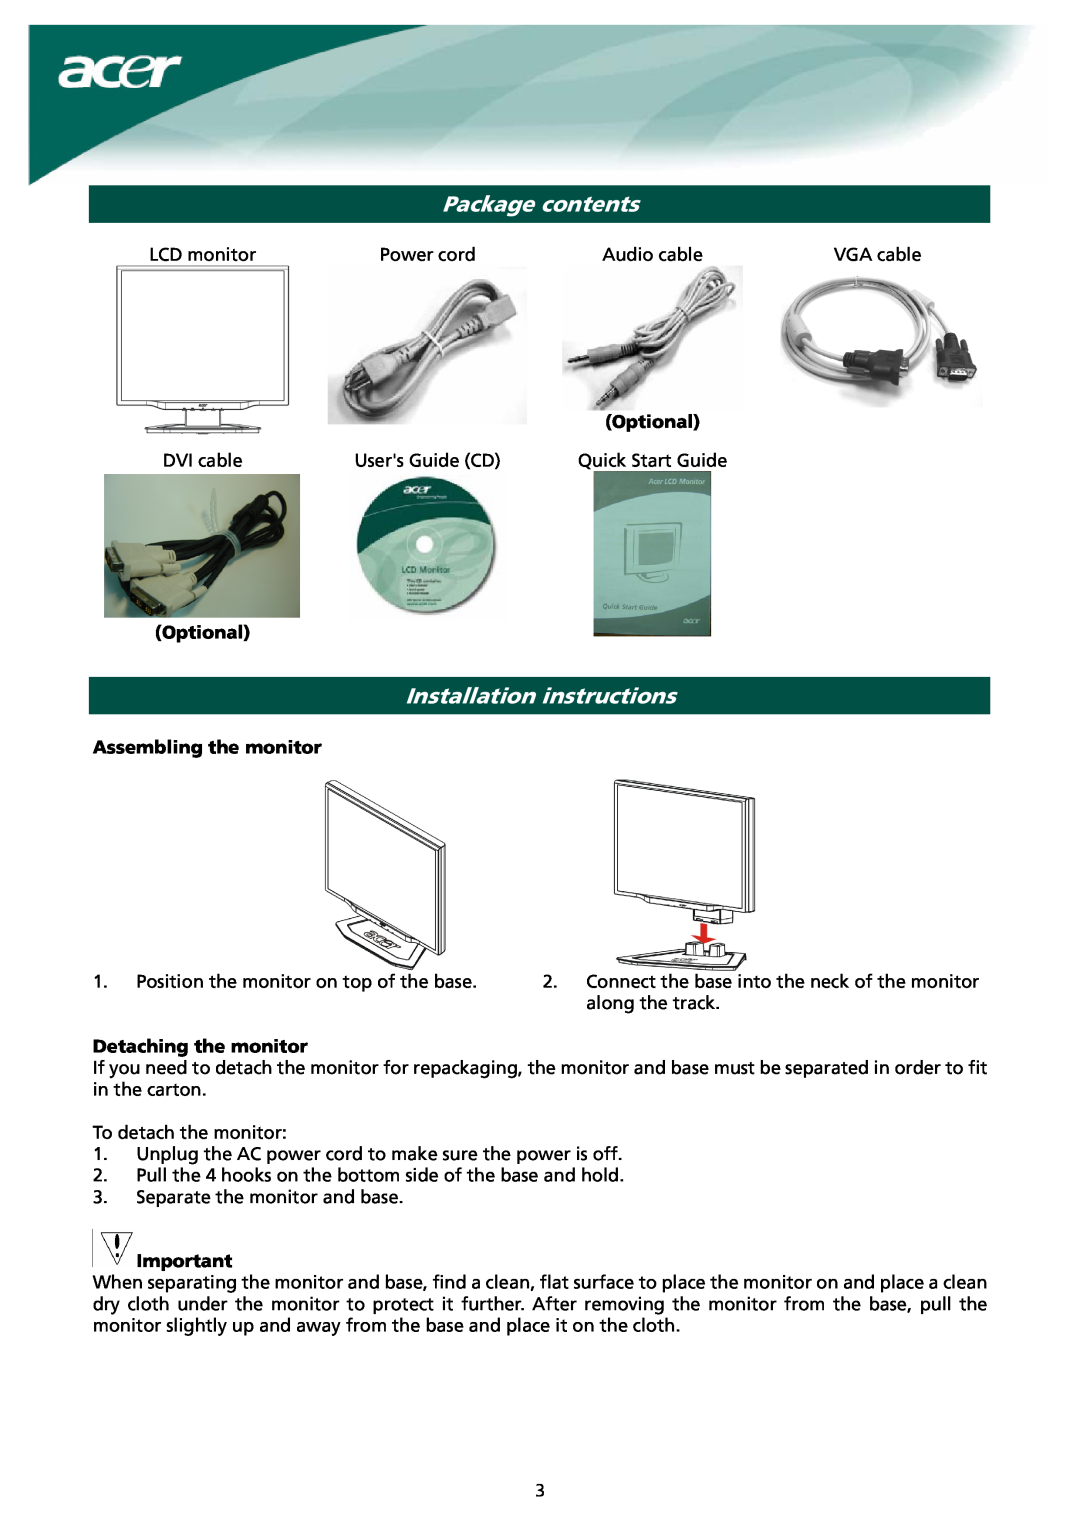 Acer X191 manual Package contents, Installation instructions, Optional, Assembling the monitor, Detaching the monitor 